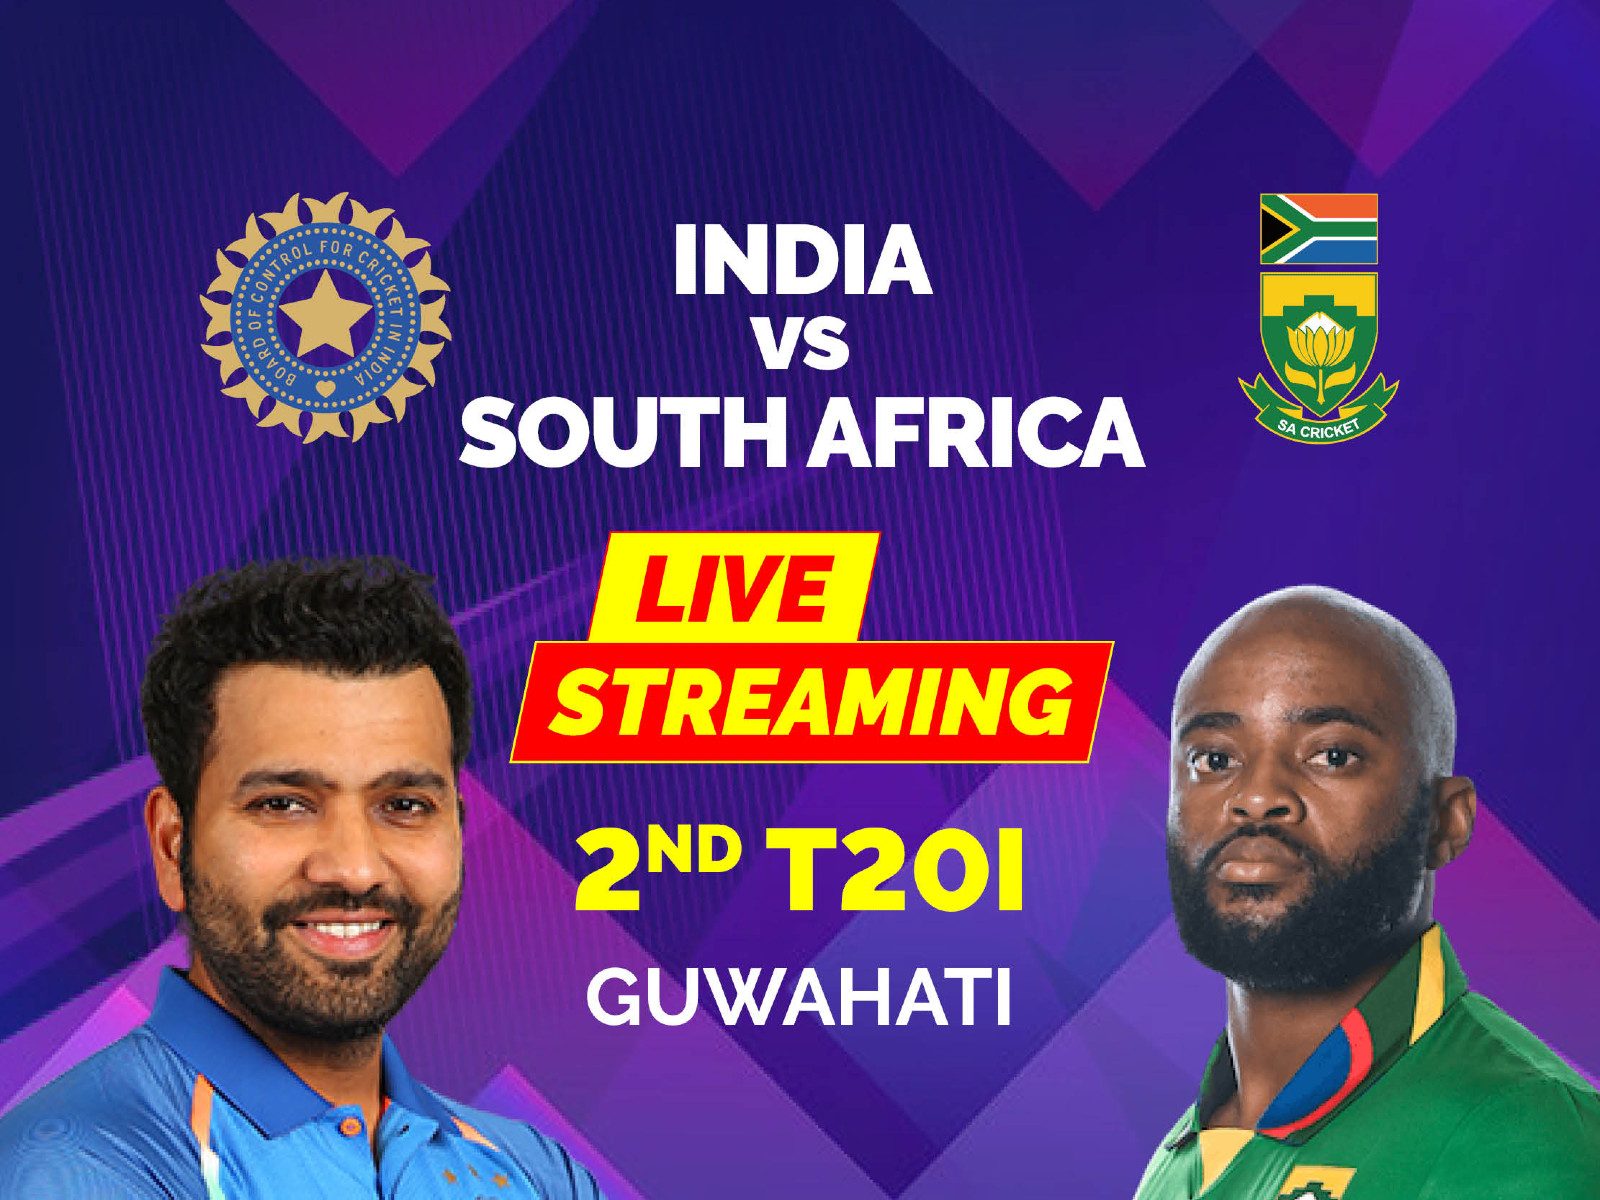 India vs South Africa Live Cricket Streaming, 2nd T20I How to Watch IND vs SA 2022 Coverage on TV And Online